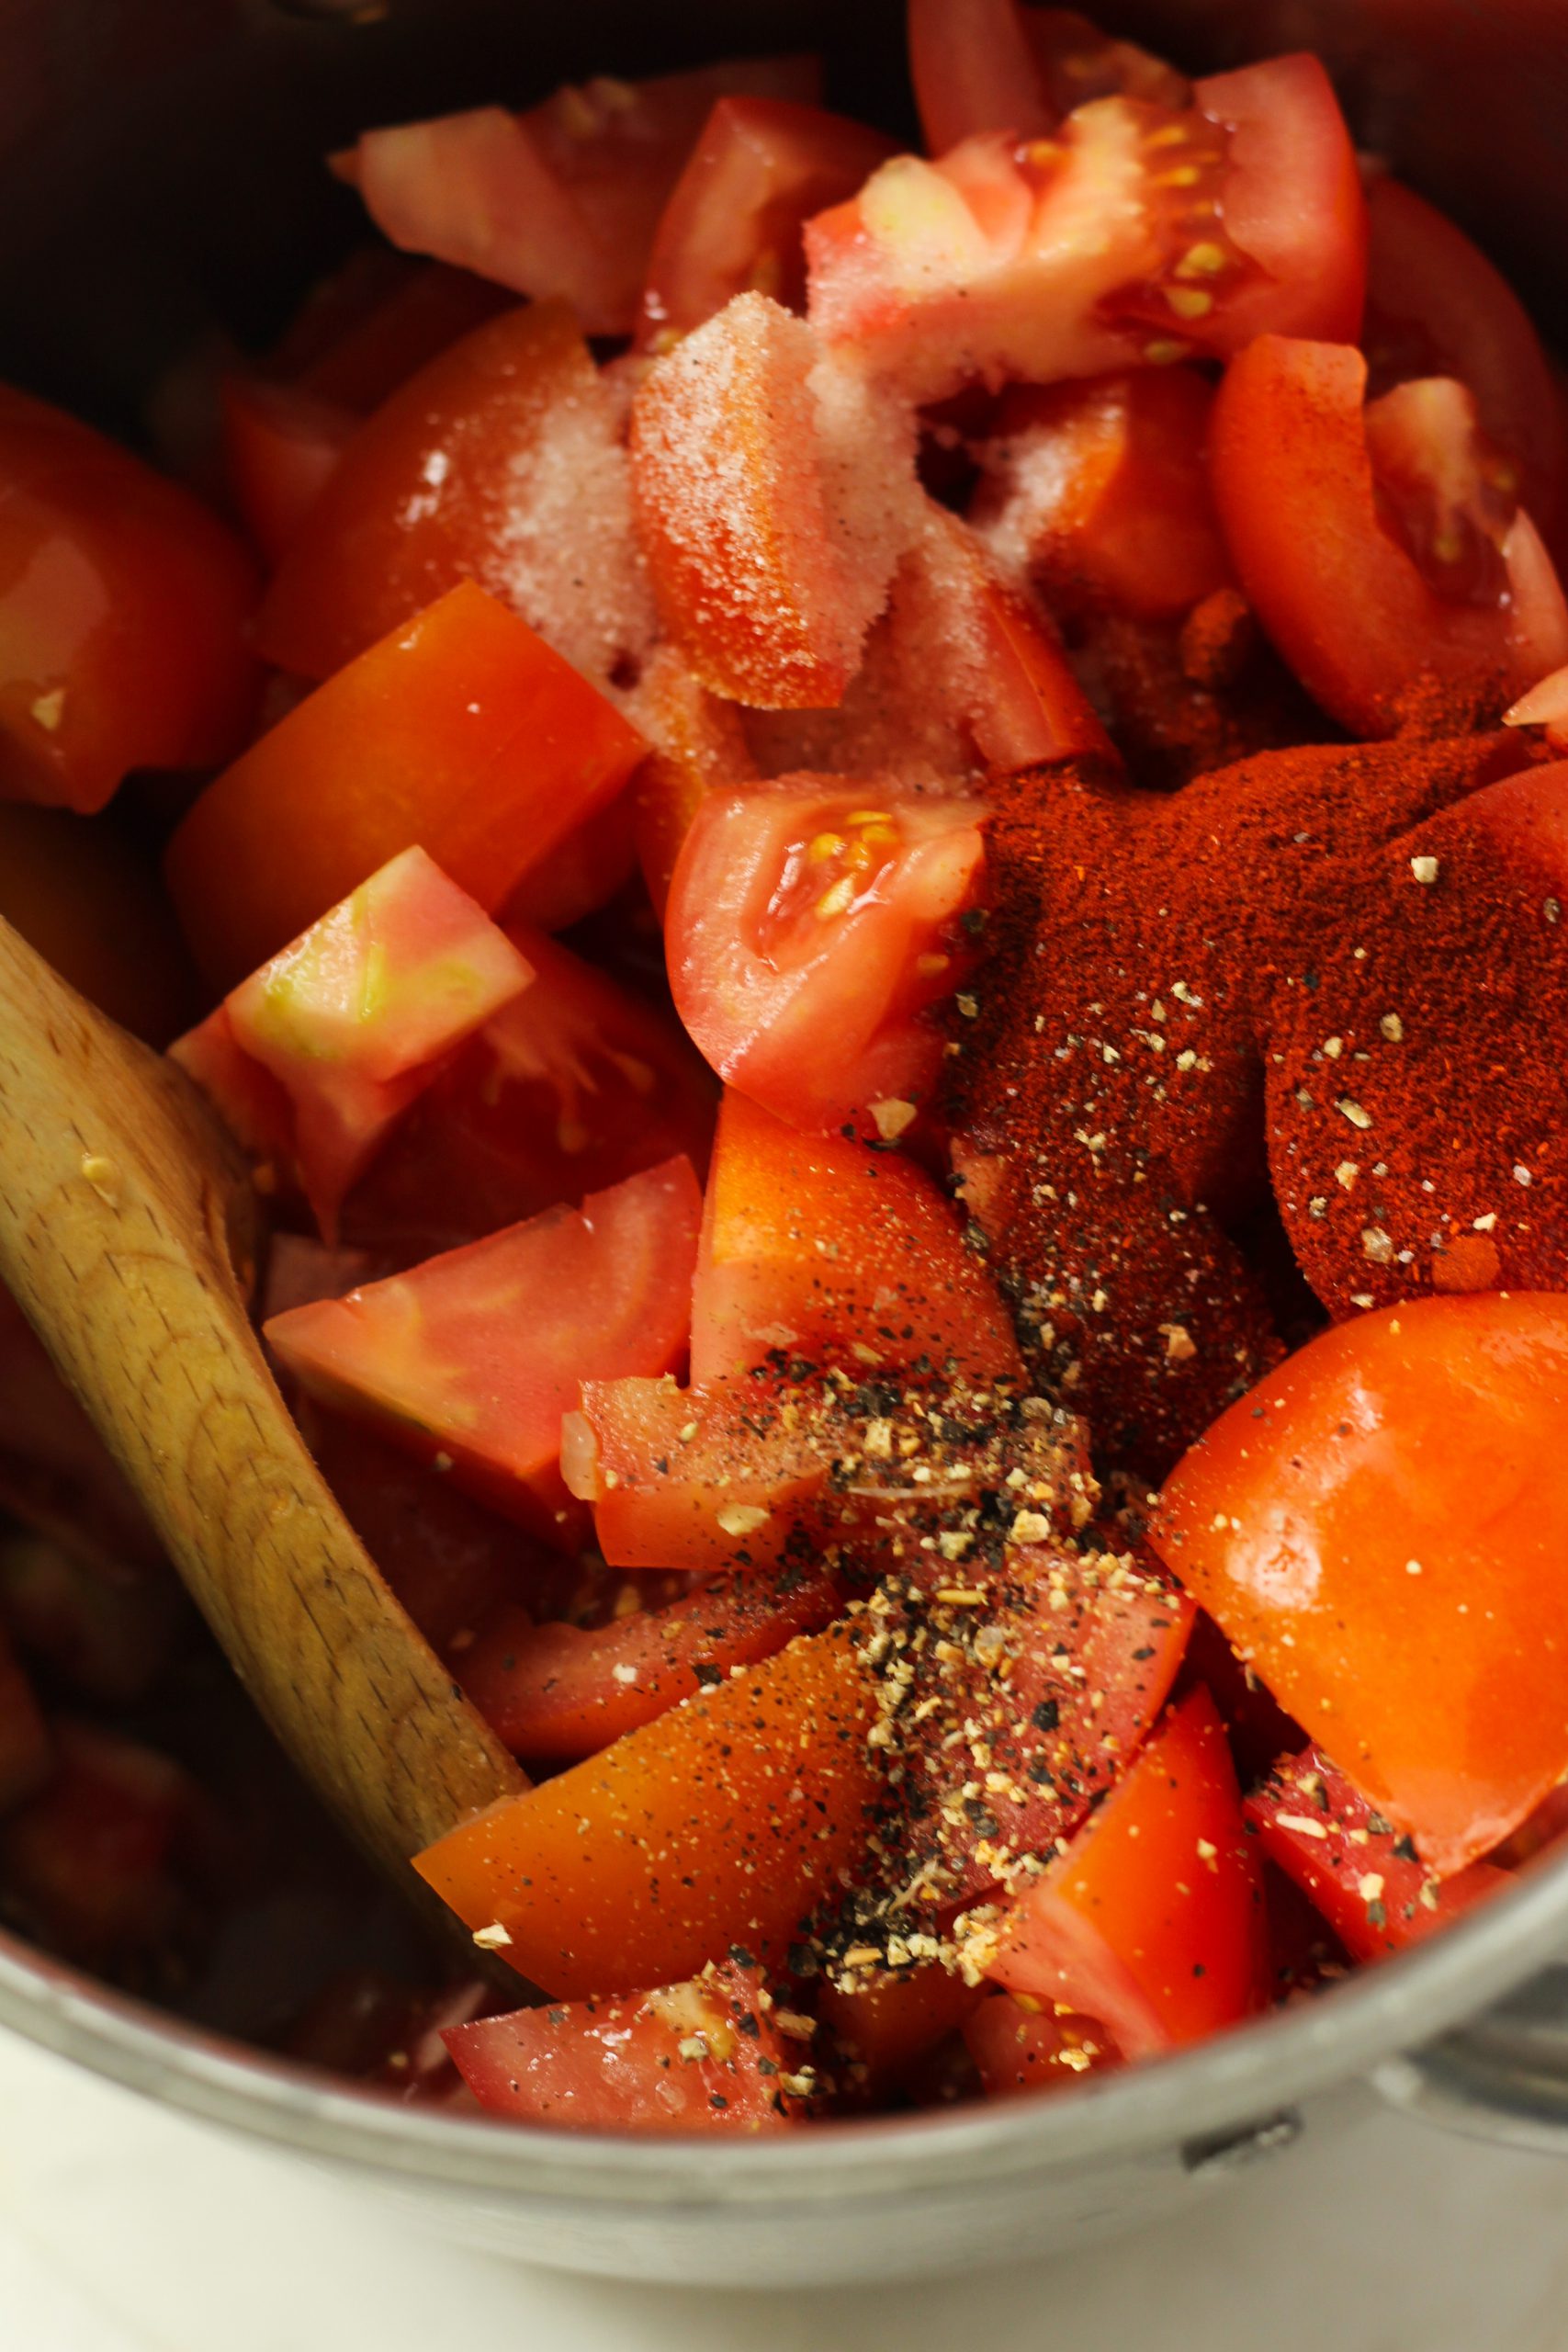 Added spices to diced tomatoes 